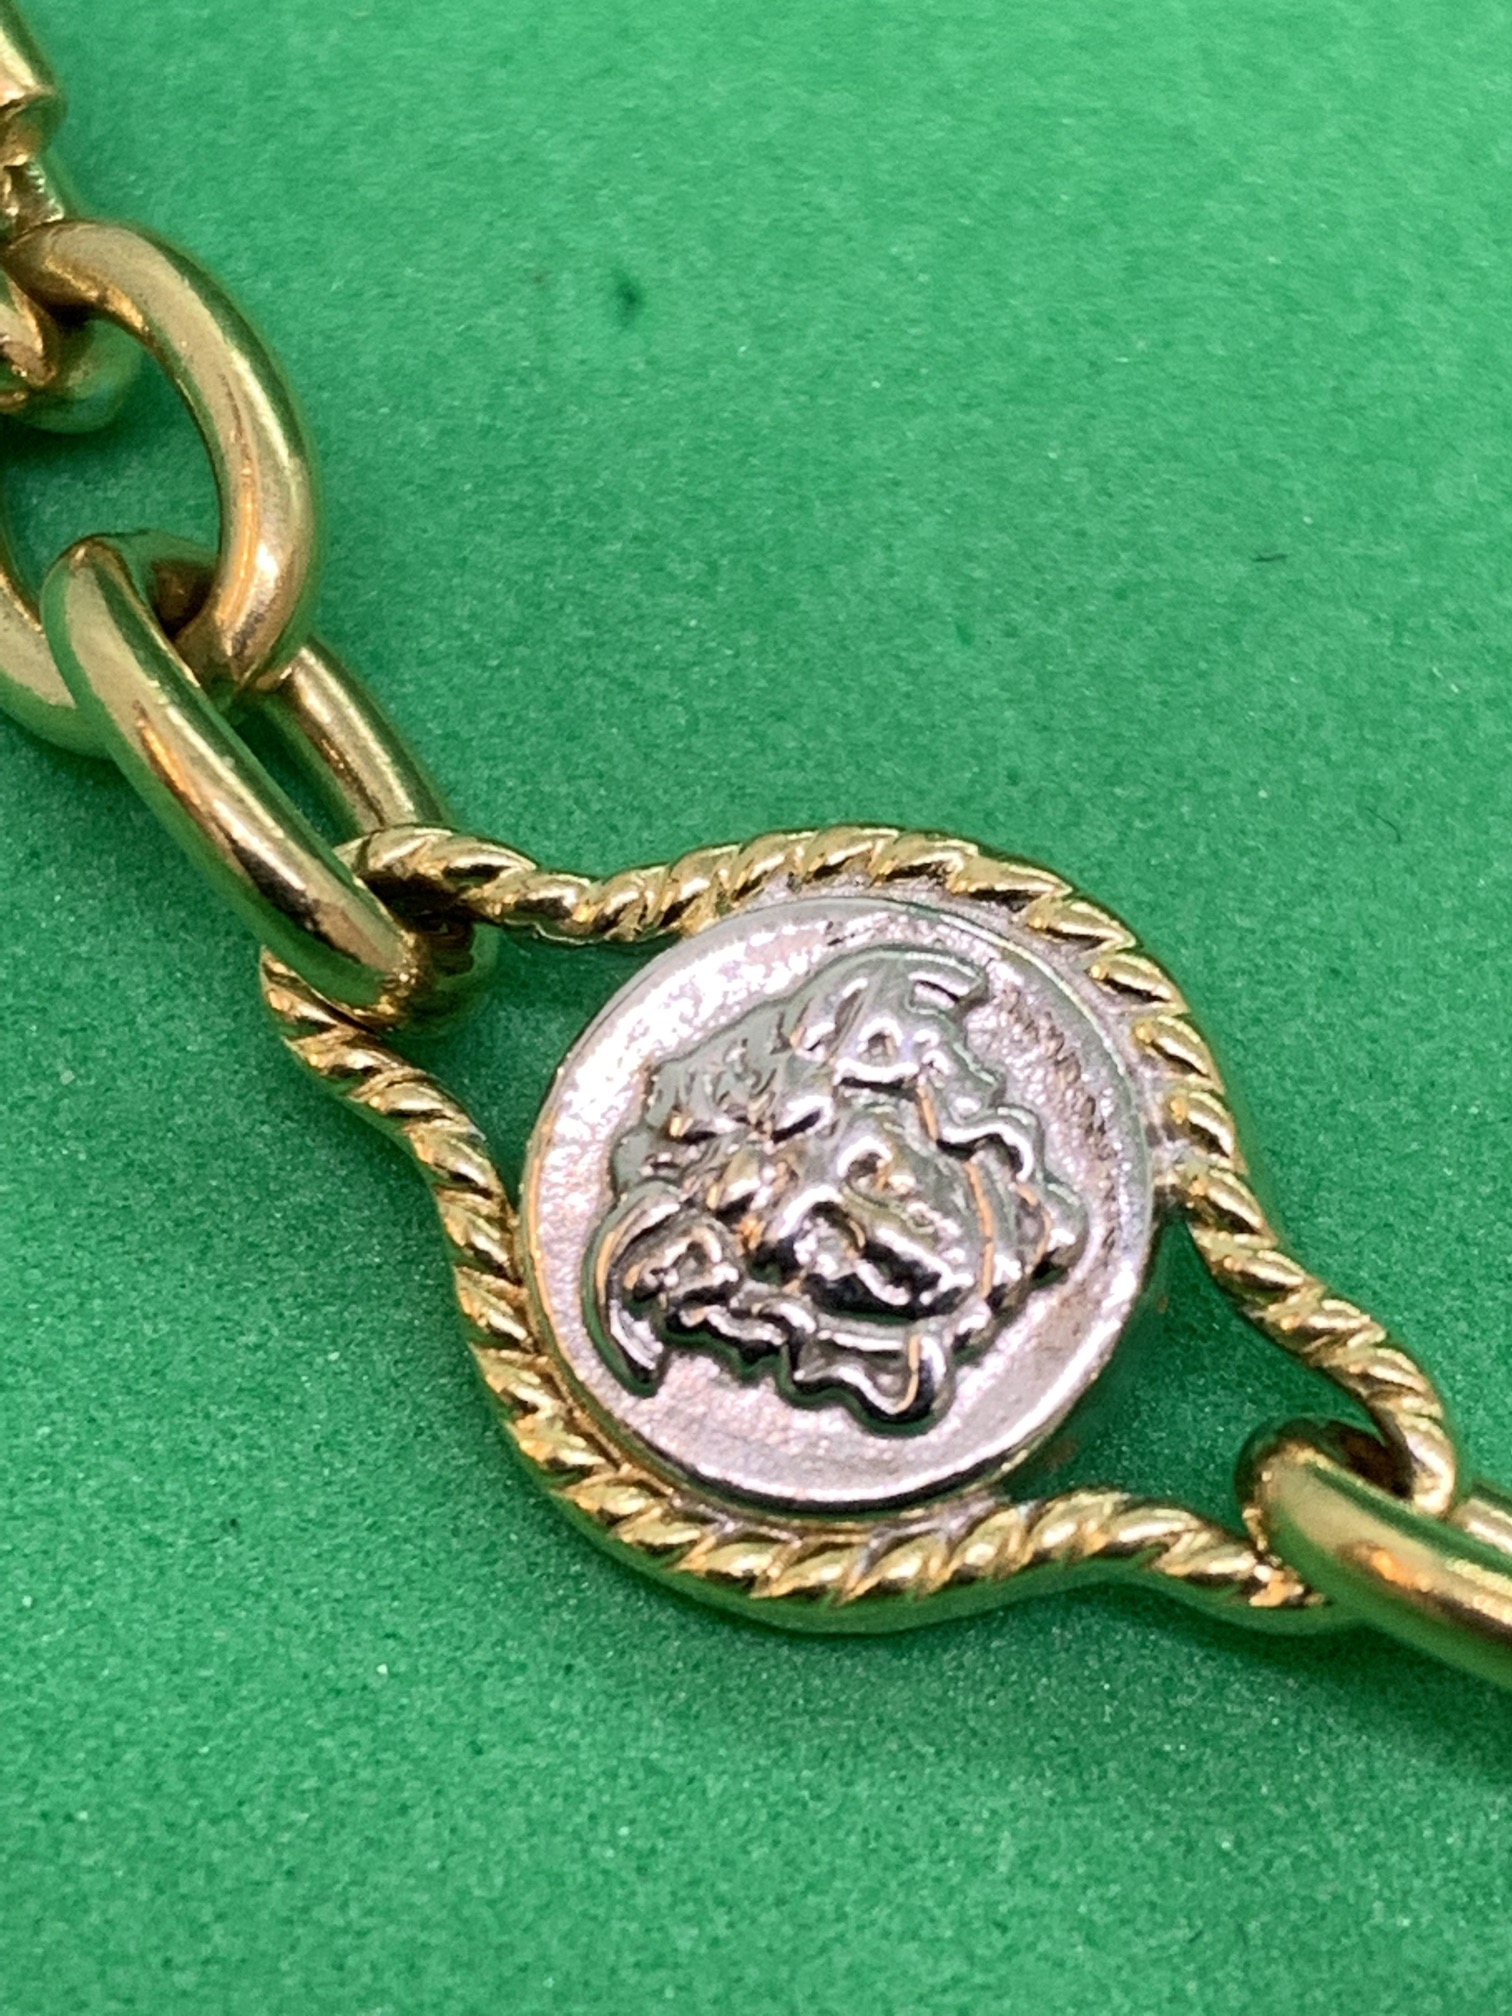 HEAVY 110 GRAMS APPROX VERSACE STYLE GOLD CHAIN - IMPRESSIVE - 24" - Image 2 of 7